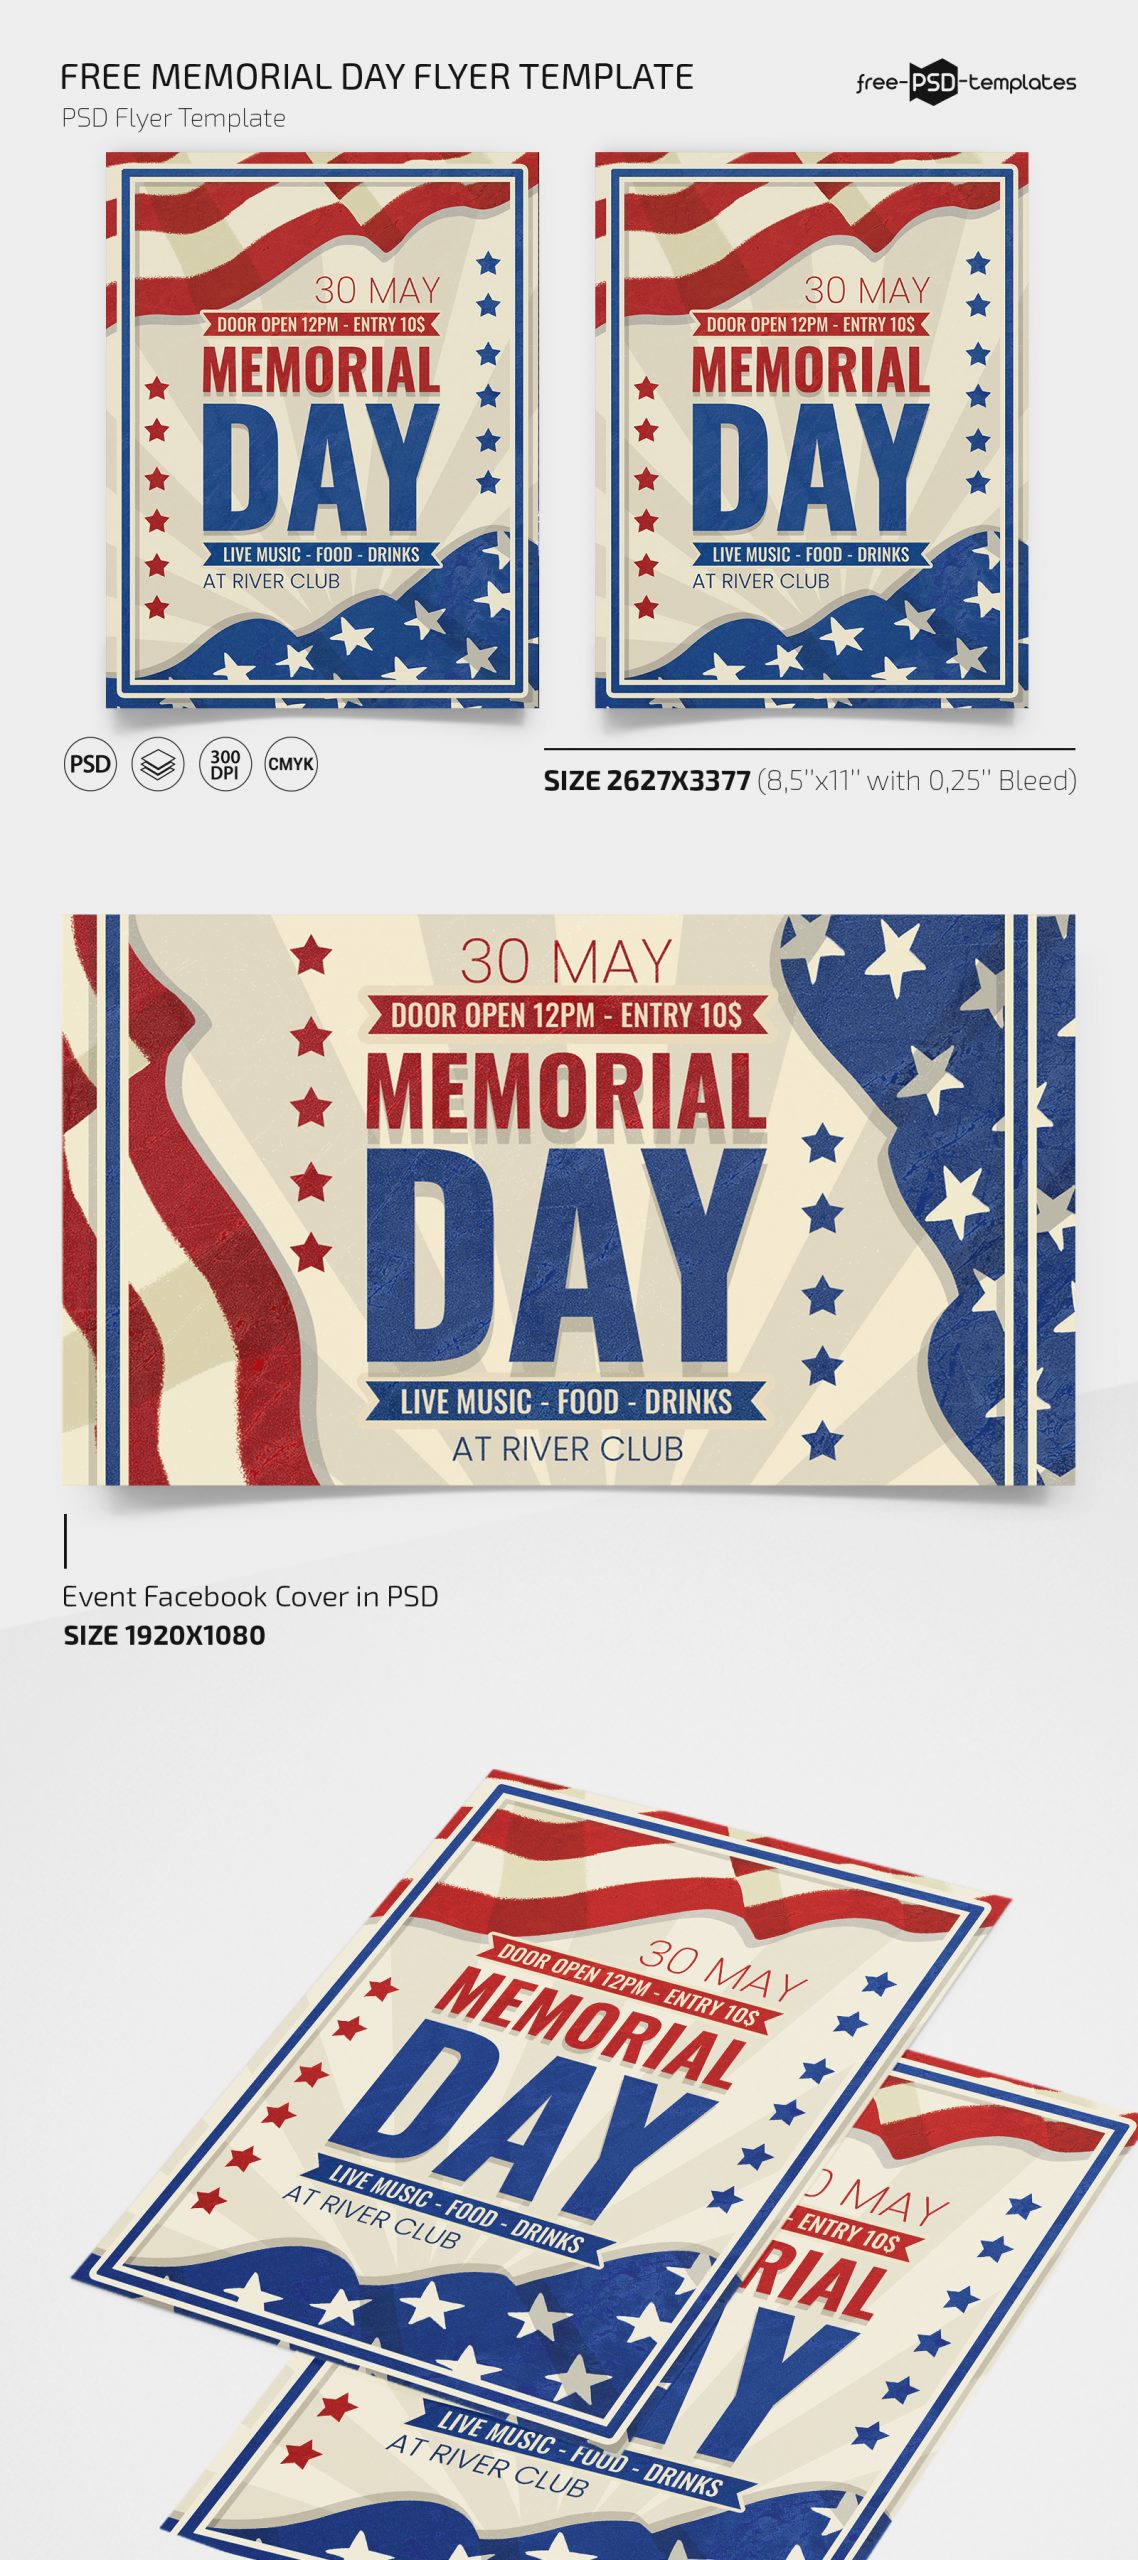 Free Memorial Day Flyer PSD Template